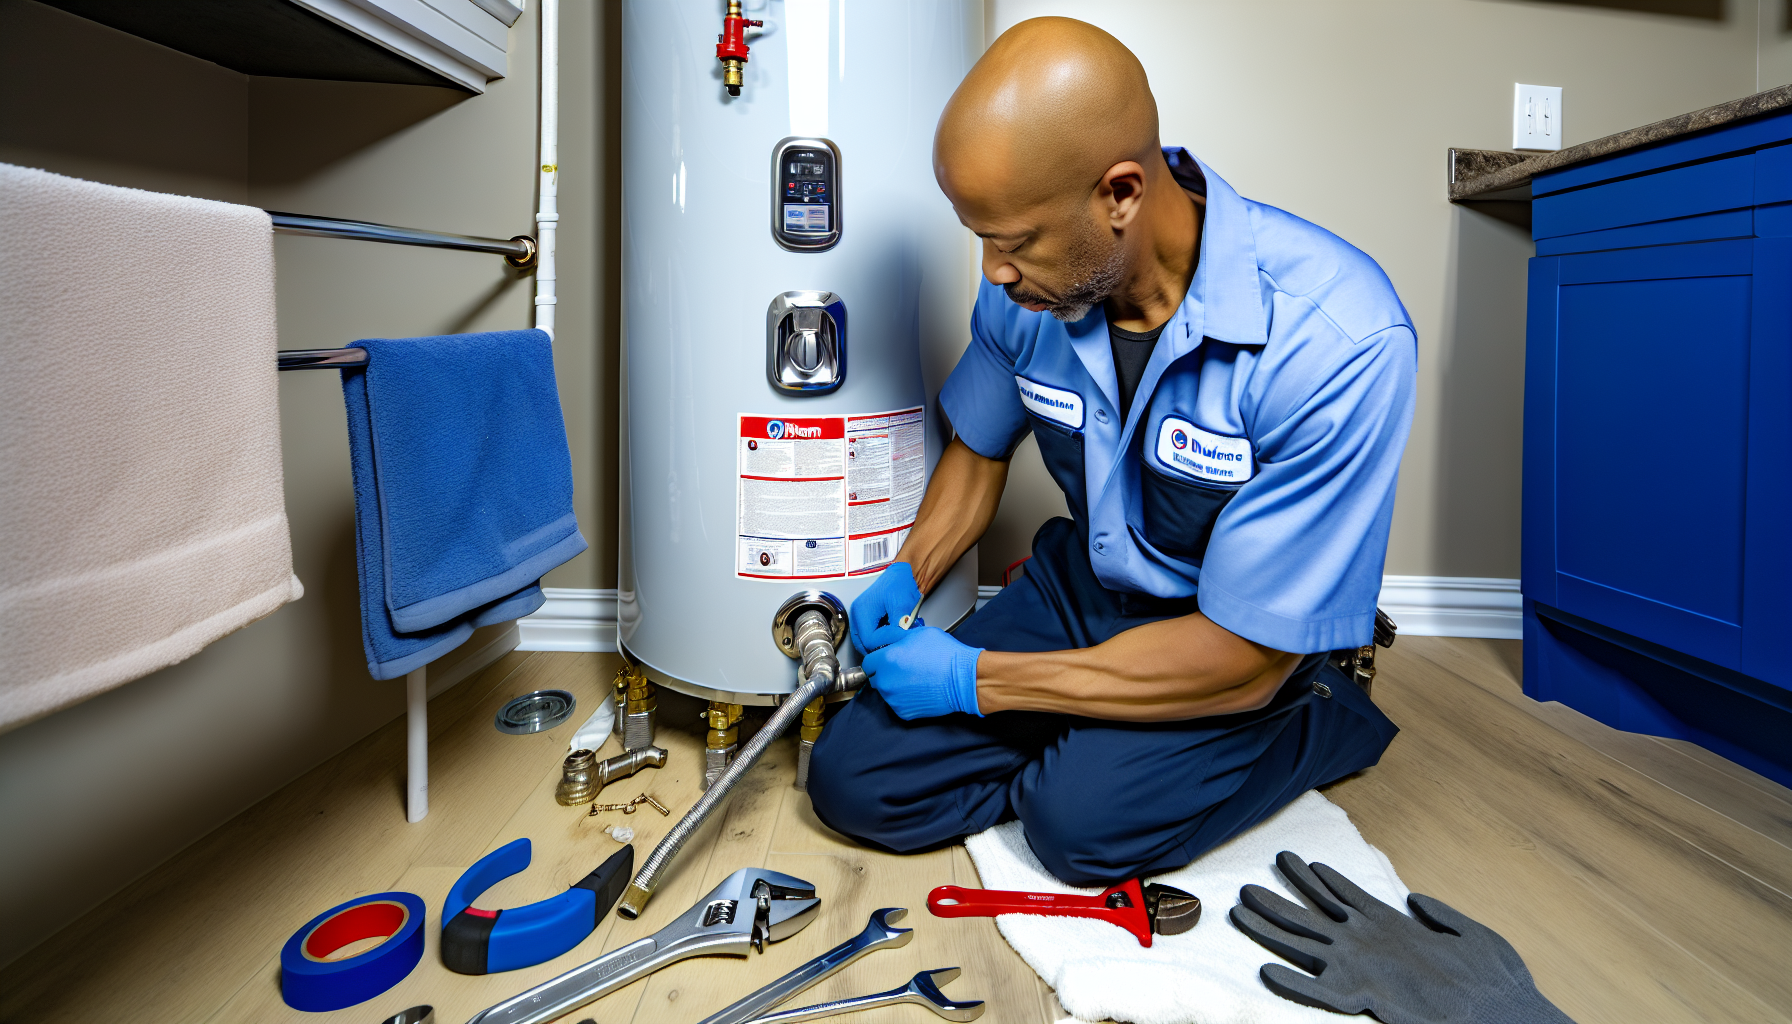 Professional installation, maintenance, and repair of Rheem hot water systems